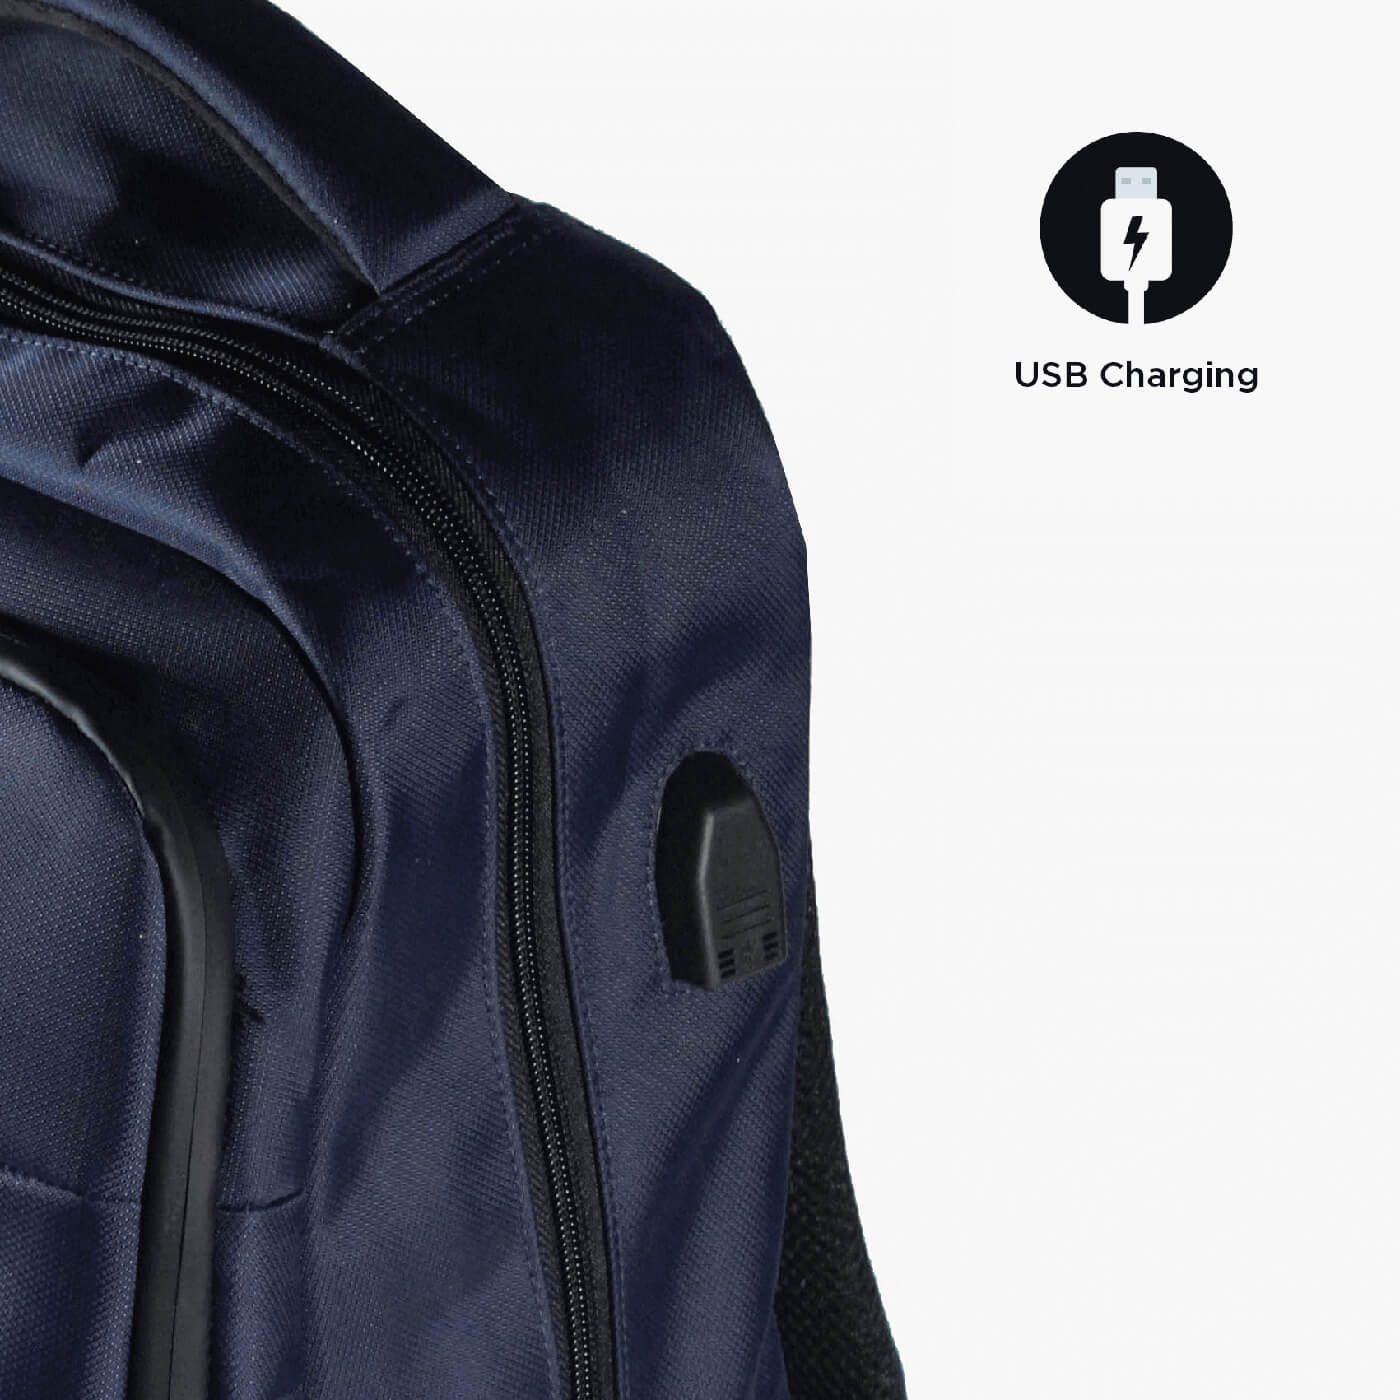 Smart Backpack With USB Charging